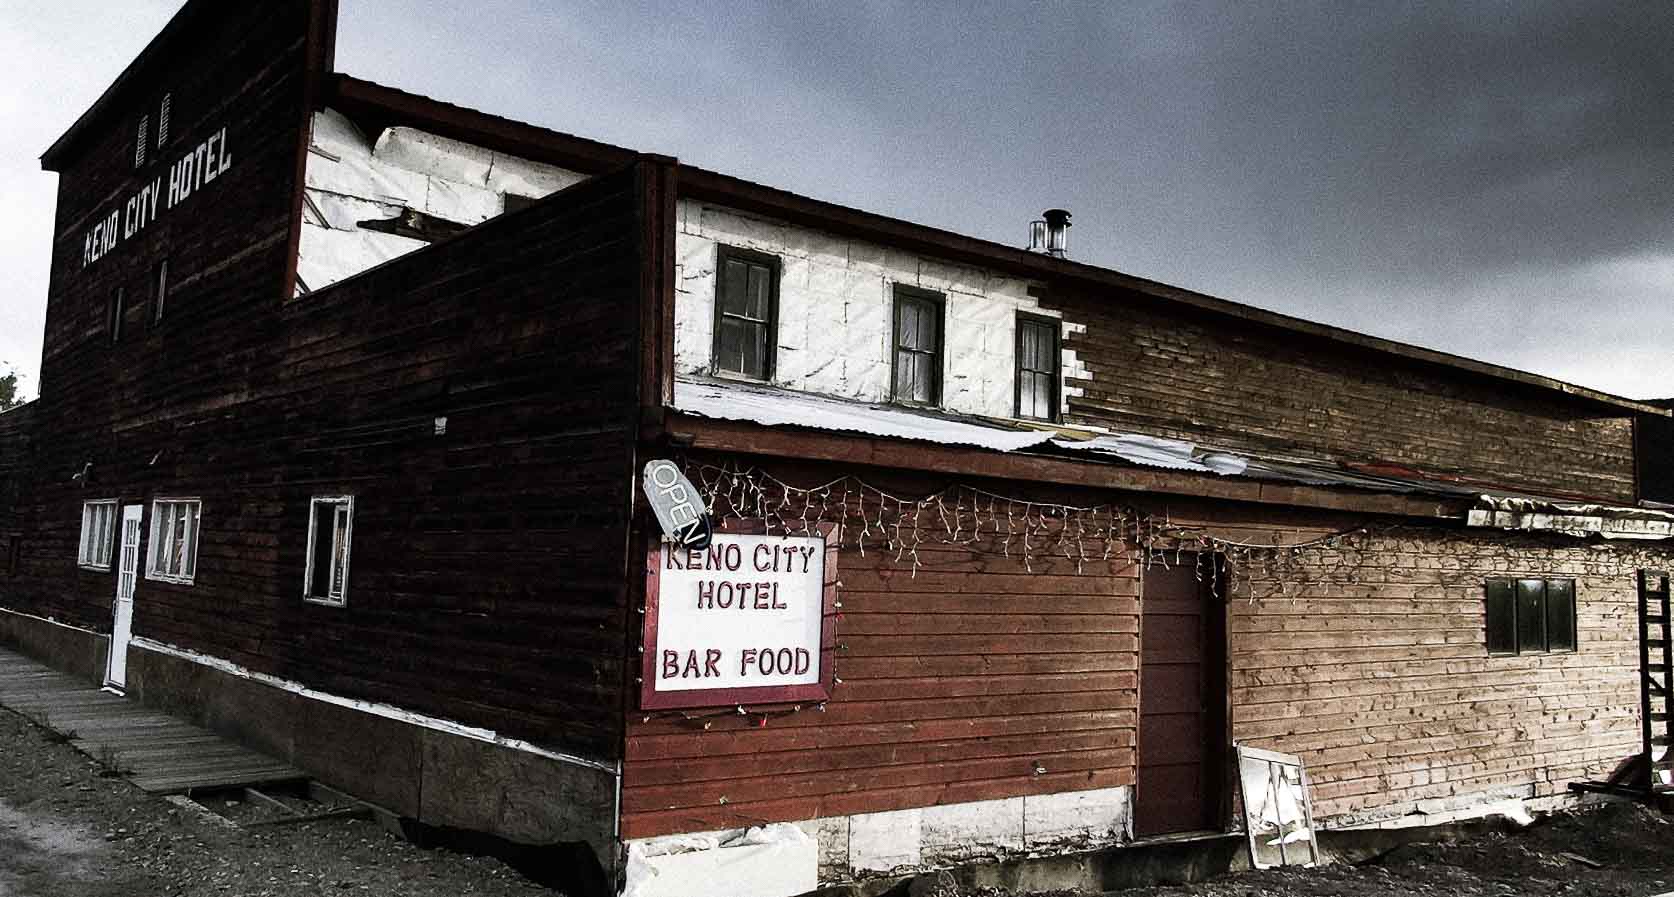 The old haunted Keno City Hotel in the Yukon near the silver mines and signpost hill